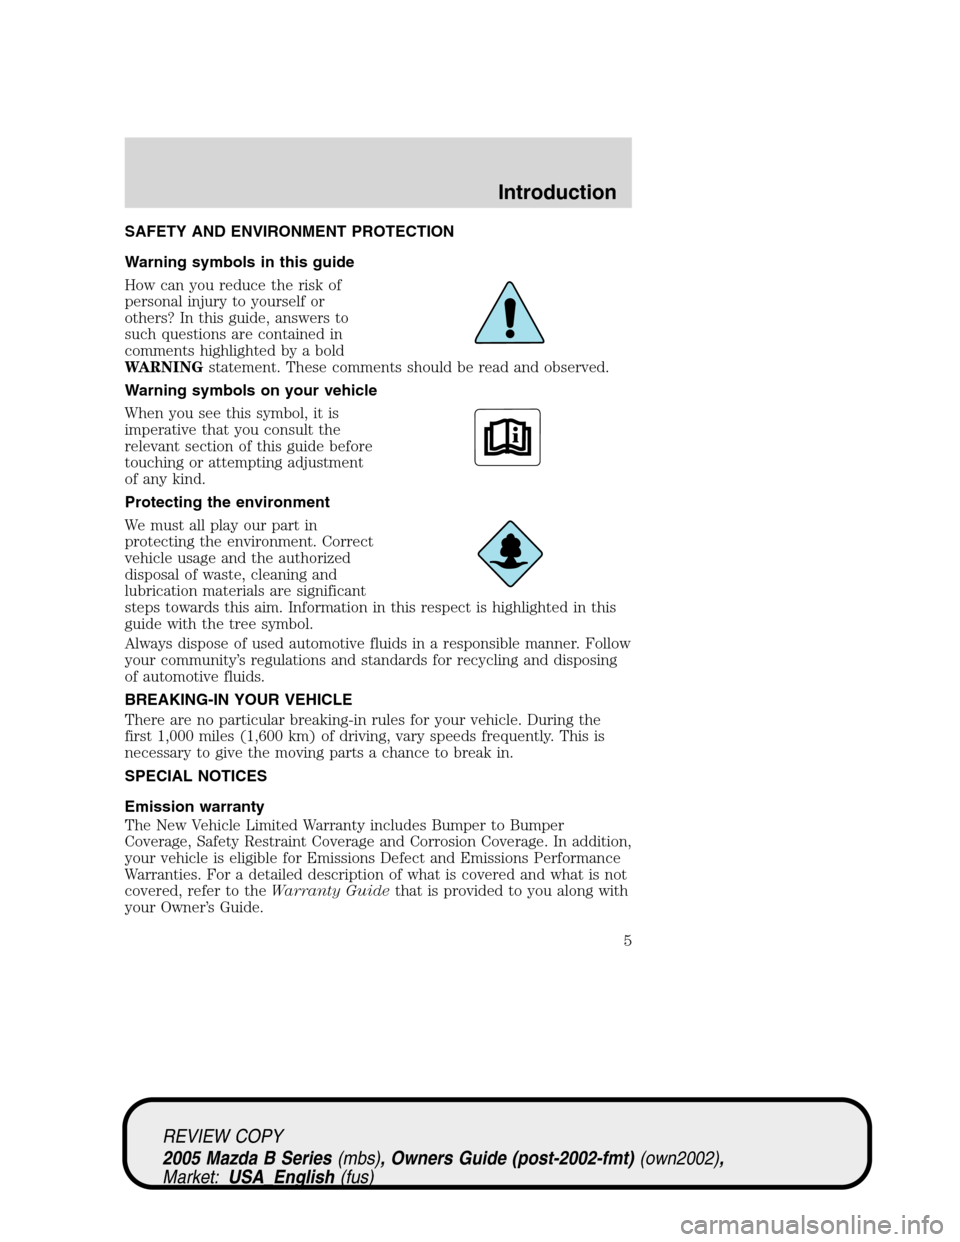 MAZDA MODEL B2300 TRUCK 2005  Owners Manual (in English) SAFETY AND ENVIRONMENT PROTECTION
Warning symbols in this guide
How can you reduce the risk of
personal injury to yourself or
others? In this guide, answers to
such questions are contained in
comments